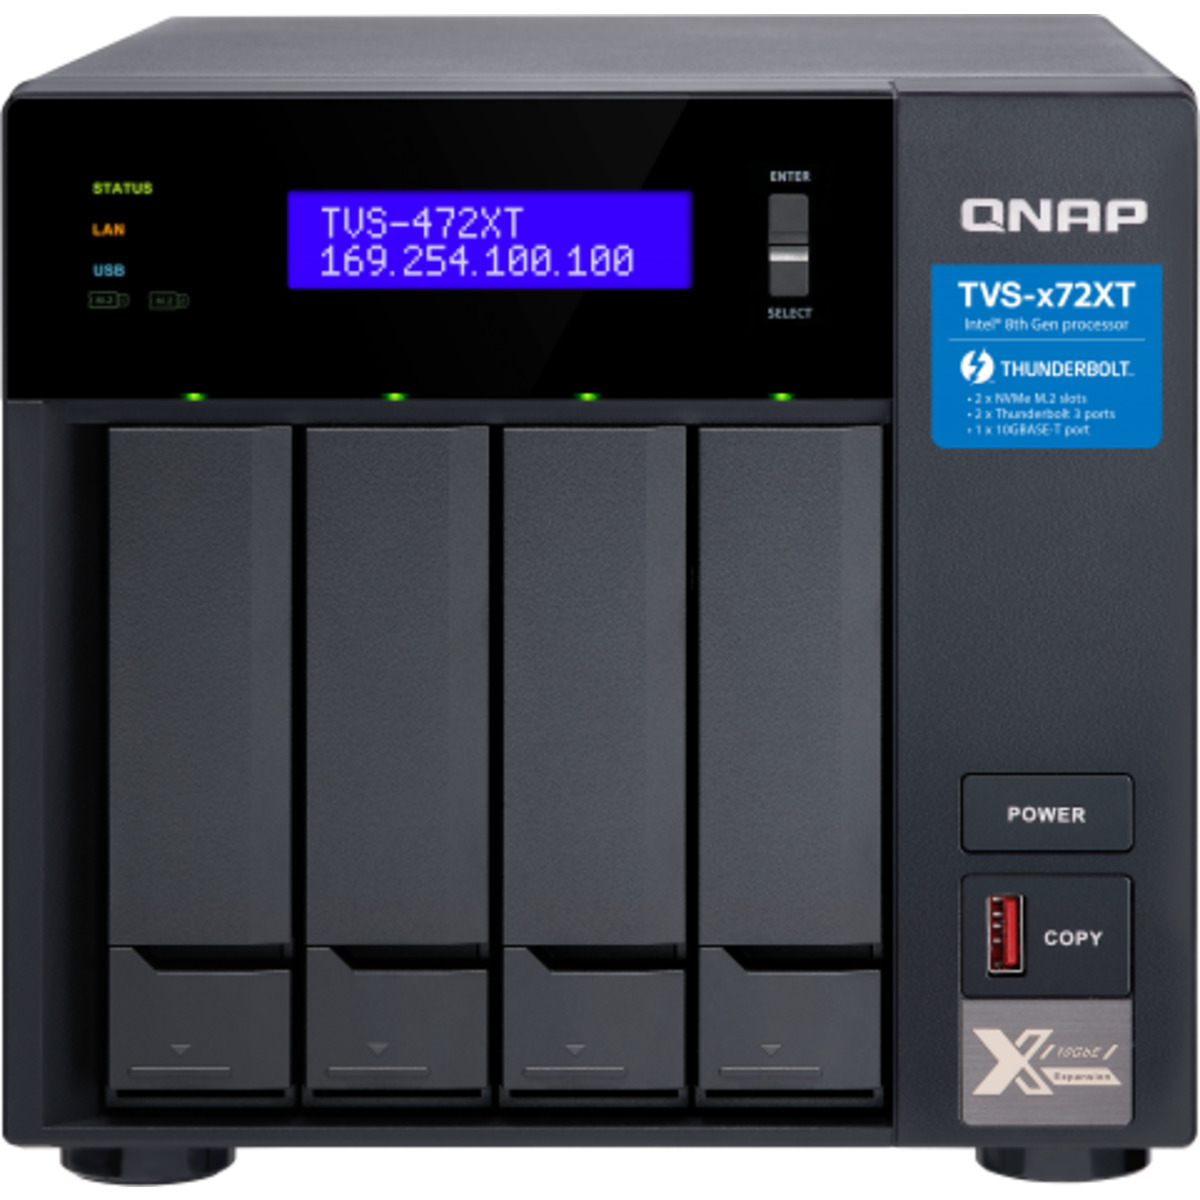 QNAP TVS-472XT Thunderbolt 3 32tb 4-Bay Desktop Multimedia / Power User / Business DAS-NAS - Combo Direct + Network Storage Device 4x8tb Seagate IronWolf ST8000VN004 3.5 7200rpm SATA 6Gb/s HDD NAS Class Drives Installed - Burn-In Tested - FREE RAM UPGRADE TVS-472XT Thunderbolt 3